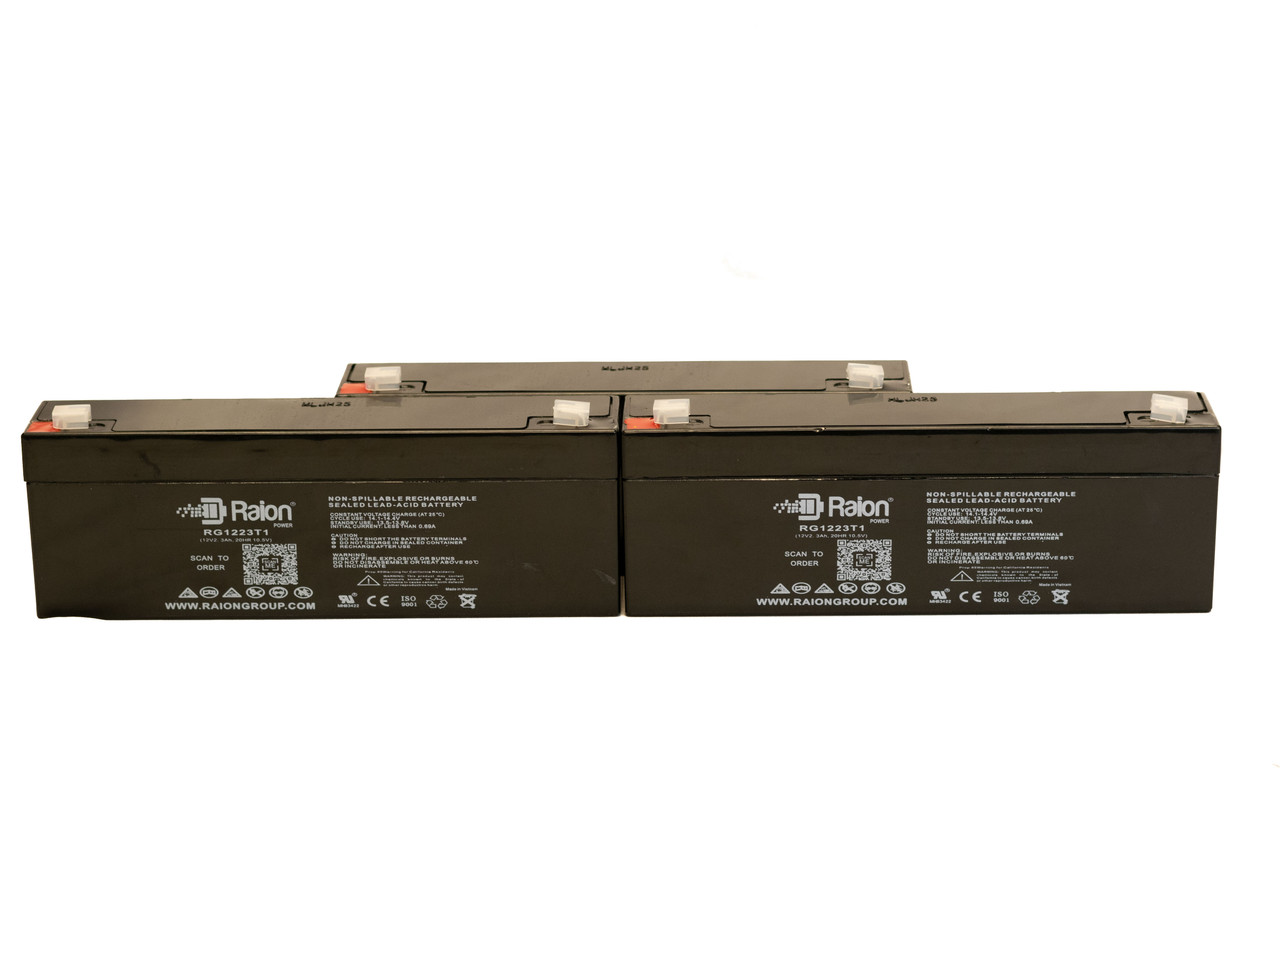 Raion Power 12V 2.3Ah RG1223T1 Replacement Medical Battery for Kontron 400 - 3 Pack